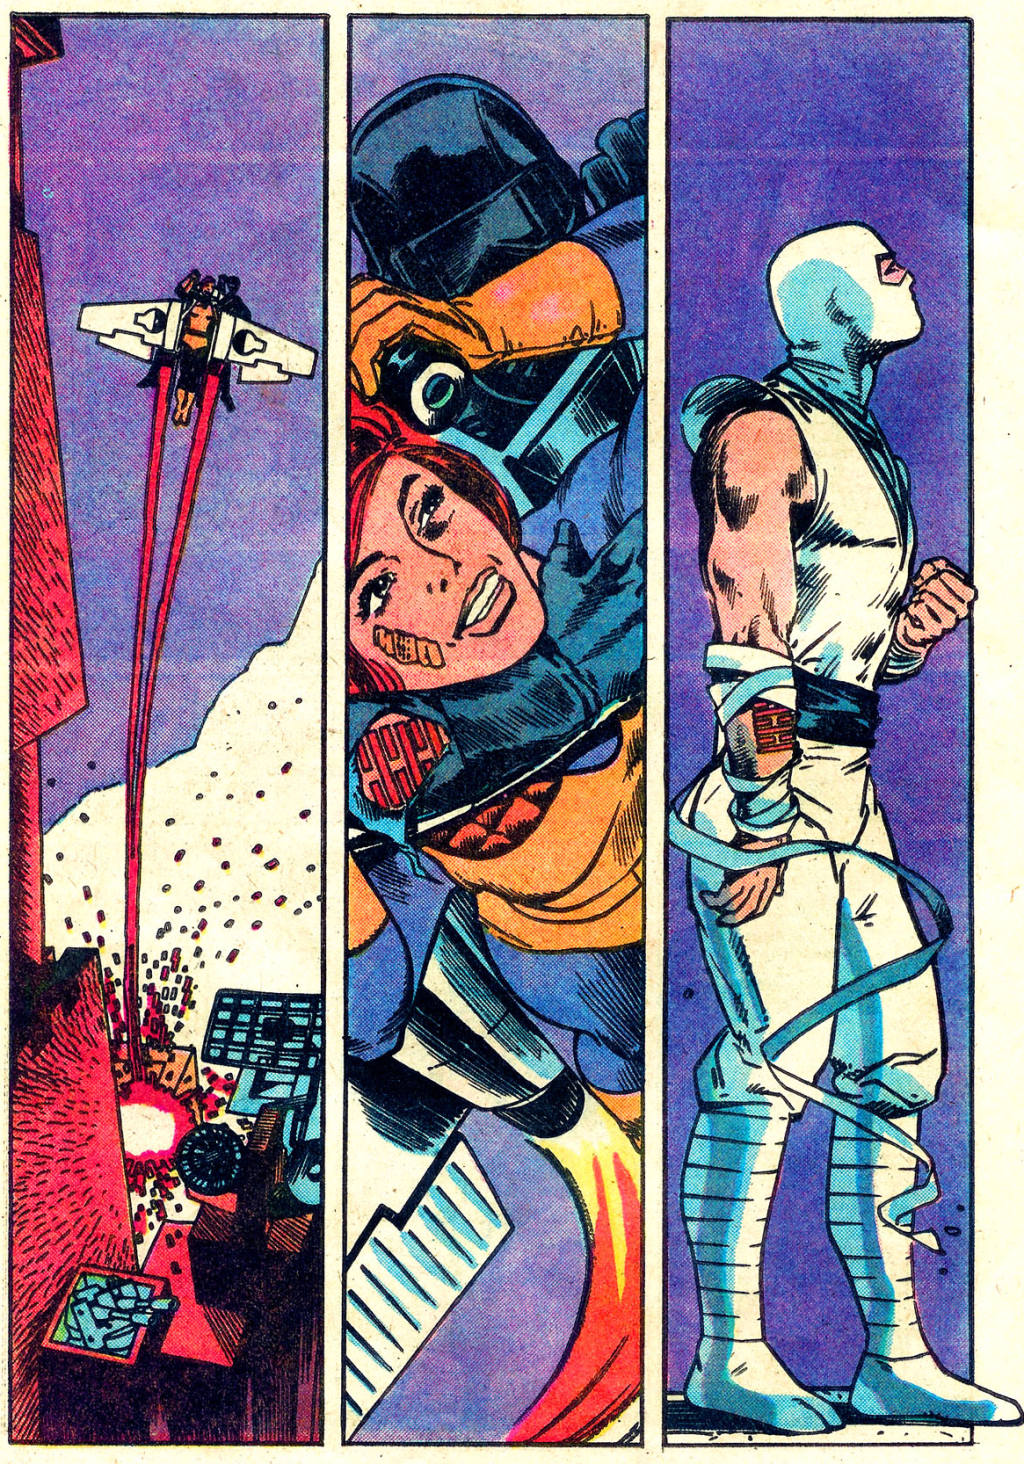 Snake-Eyes and Scarlett escape the clutches of Storm Shadow in GI Joe: A Real American Hero Vol. 1 #21 "Silent interlude" (1983), Marvel Comics. Text by Larry Hama, art by Larry Hama, Steve Leialoha, George Roussos and Rick Parker.